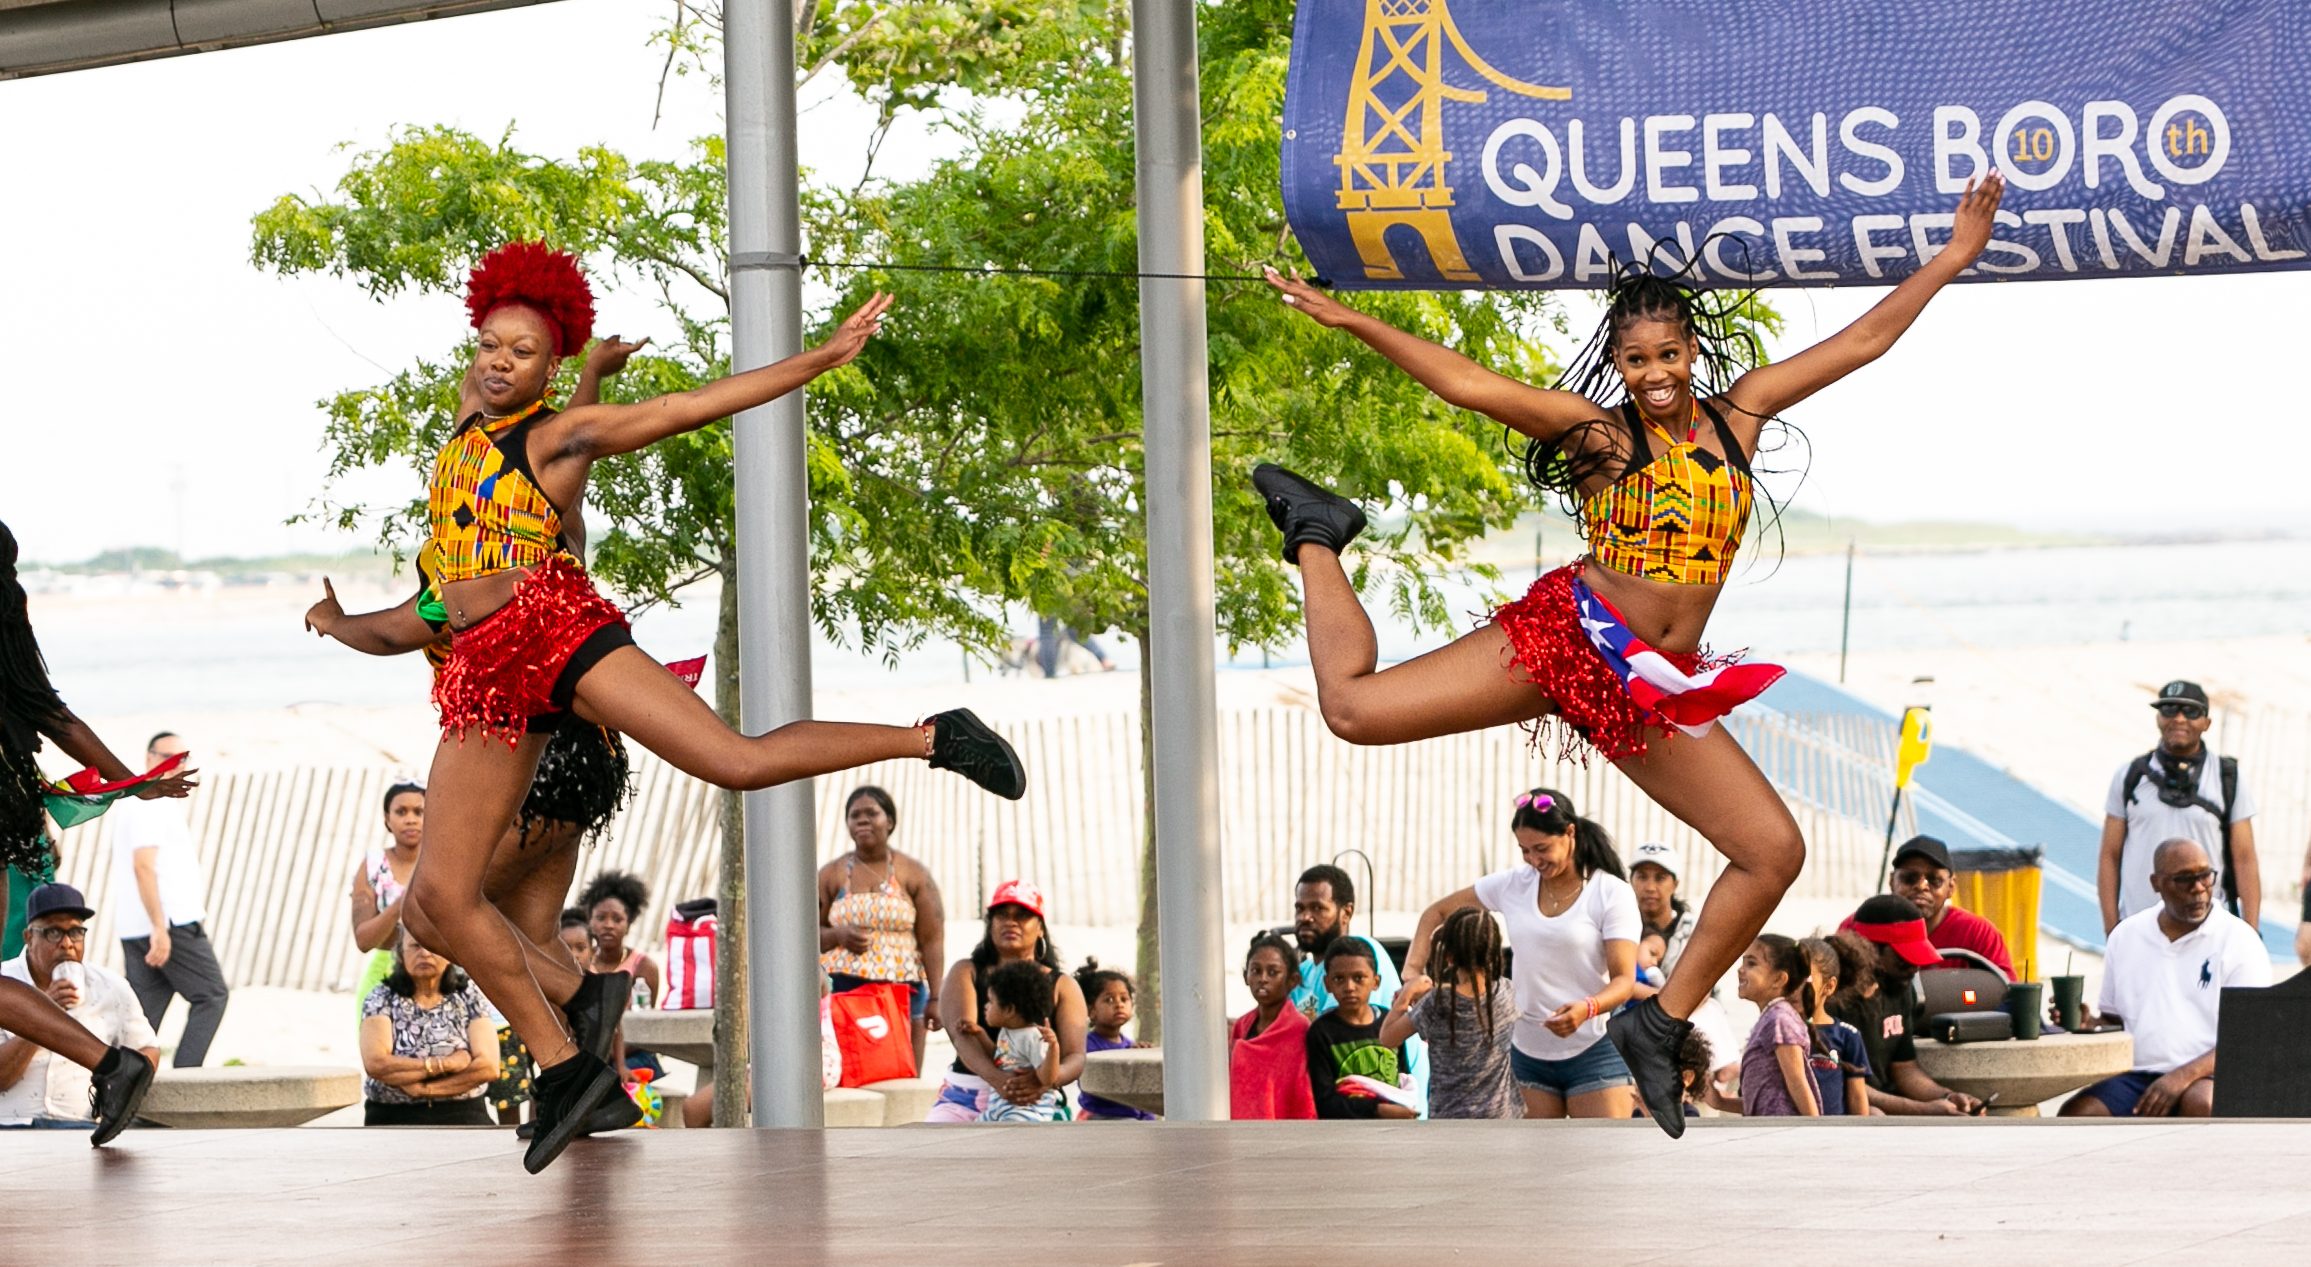 Two Caribbean dancers leaping and smiling